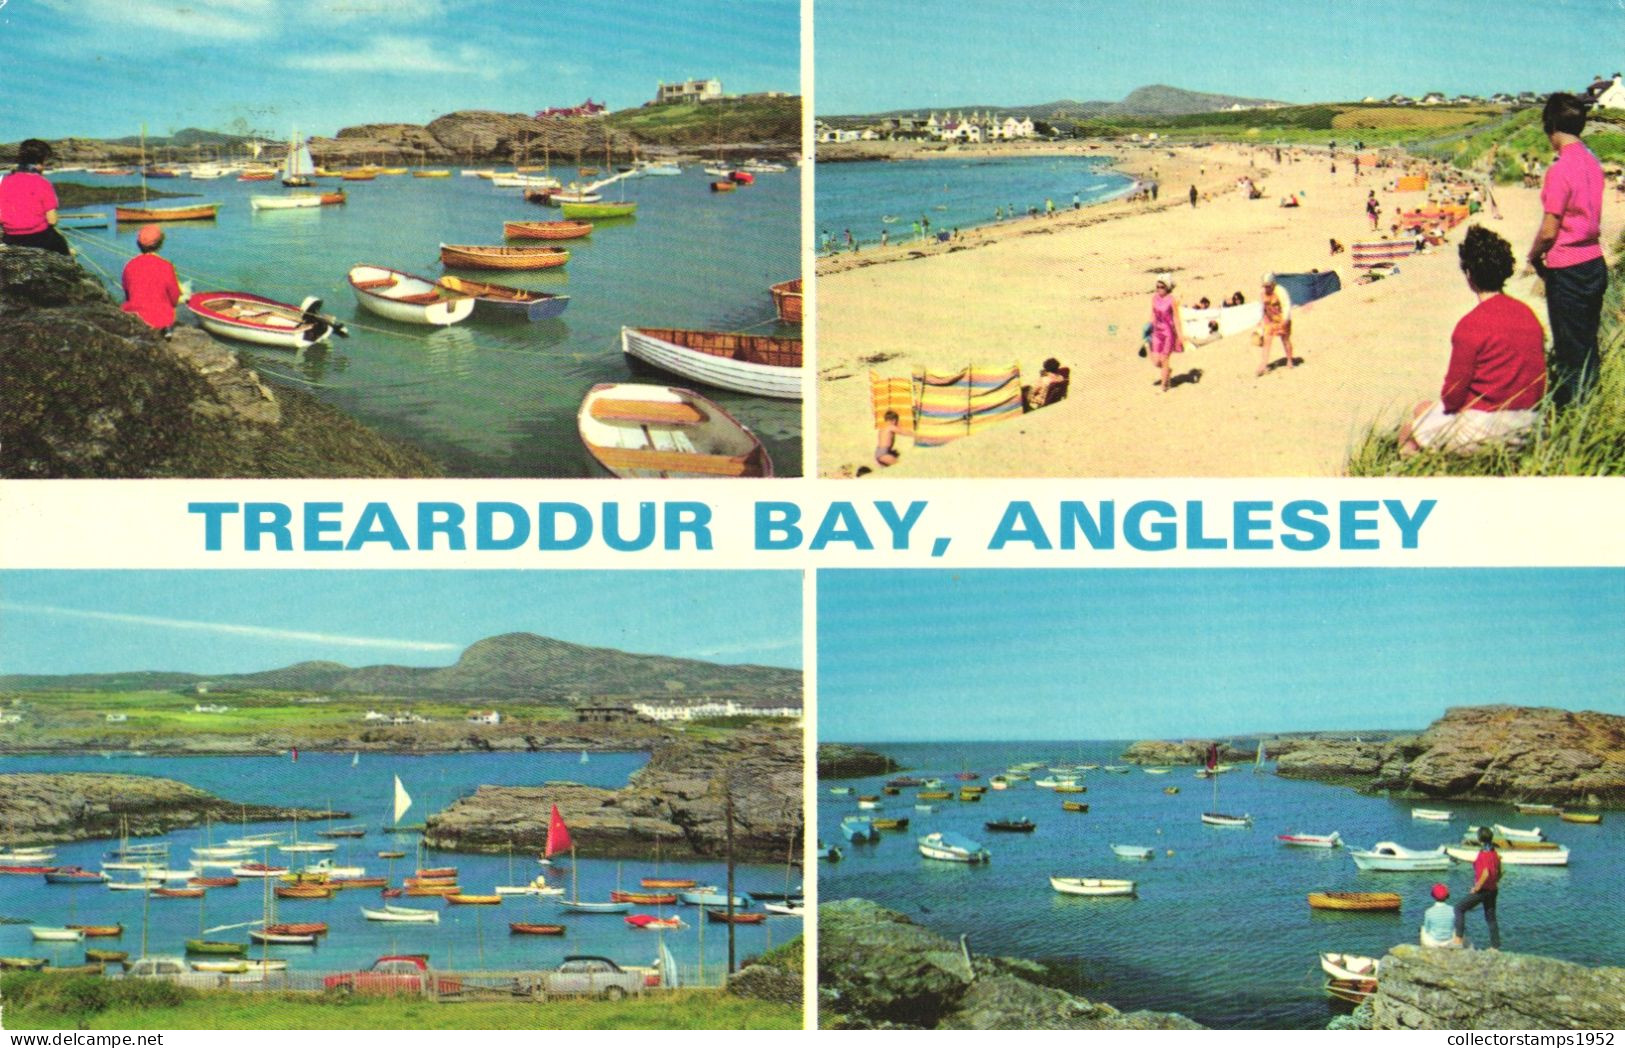 ANGLESEY, TREARDDUR BAY, MULTIPLE VIEWS, BEACH, BOATS, PORT, ARCHITECTURE, WALES, UNITED KINGDOM, POSTCARD - Anglesey